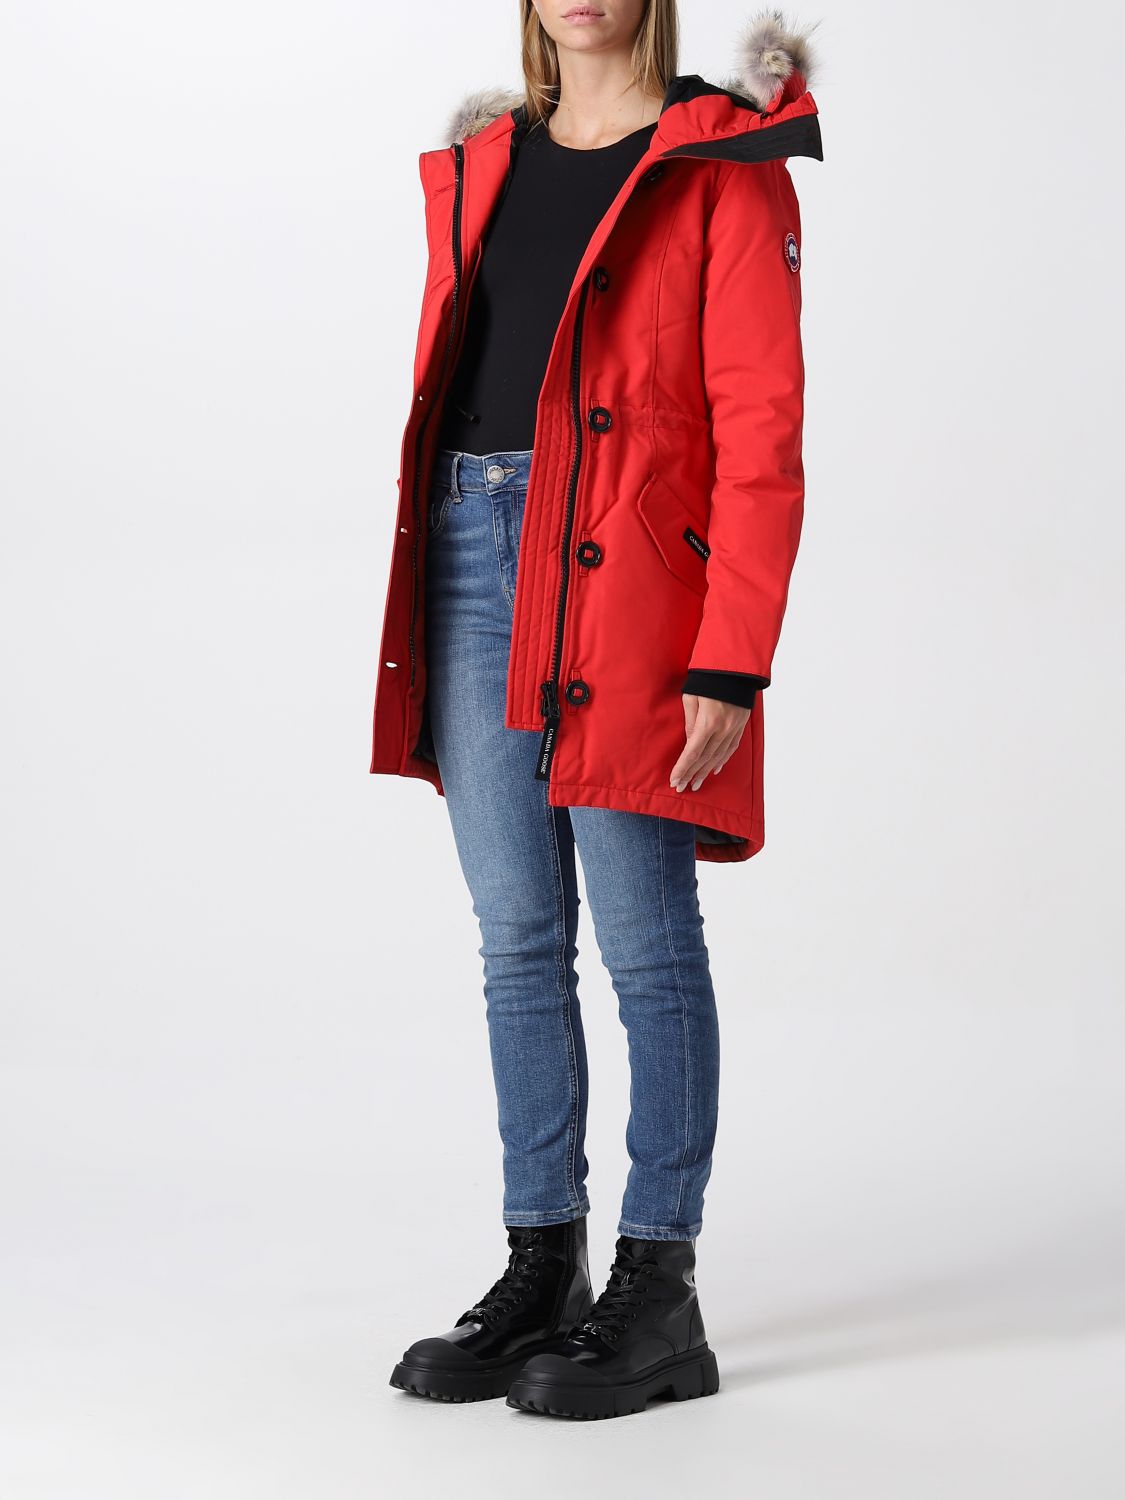 Canada Goose Canada Goose Women's Red Polyester Outerwear Jacket